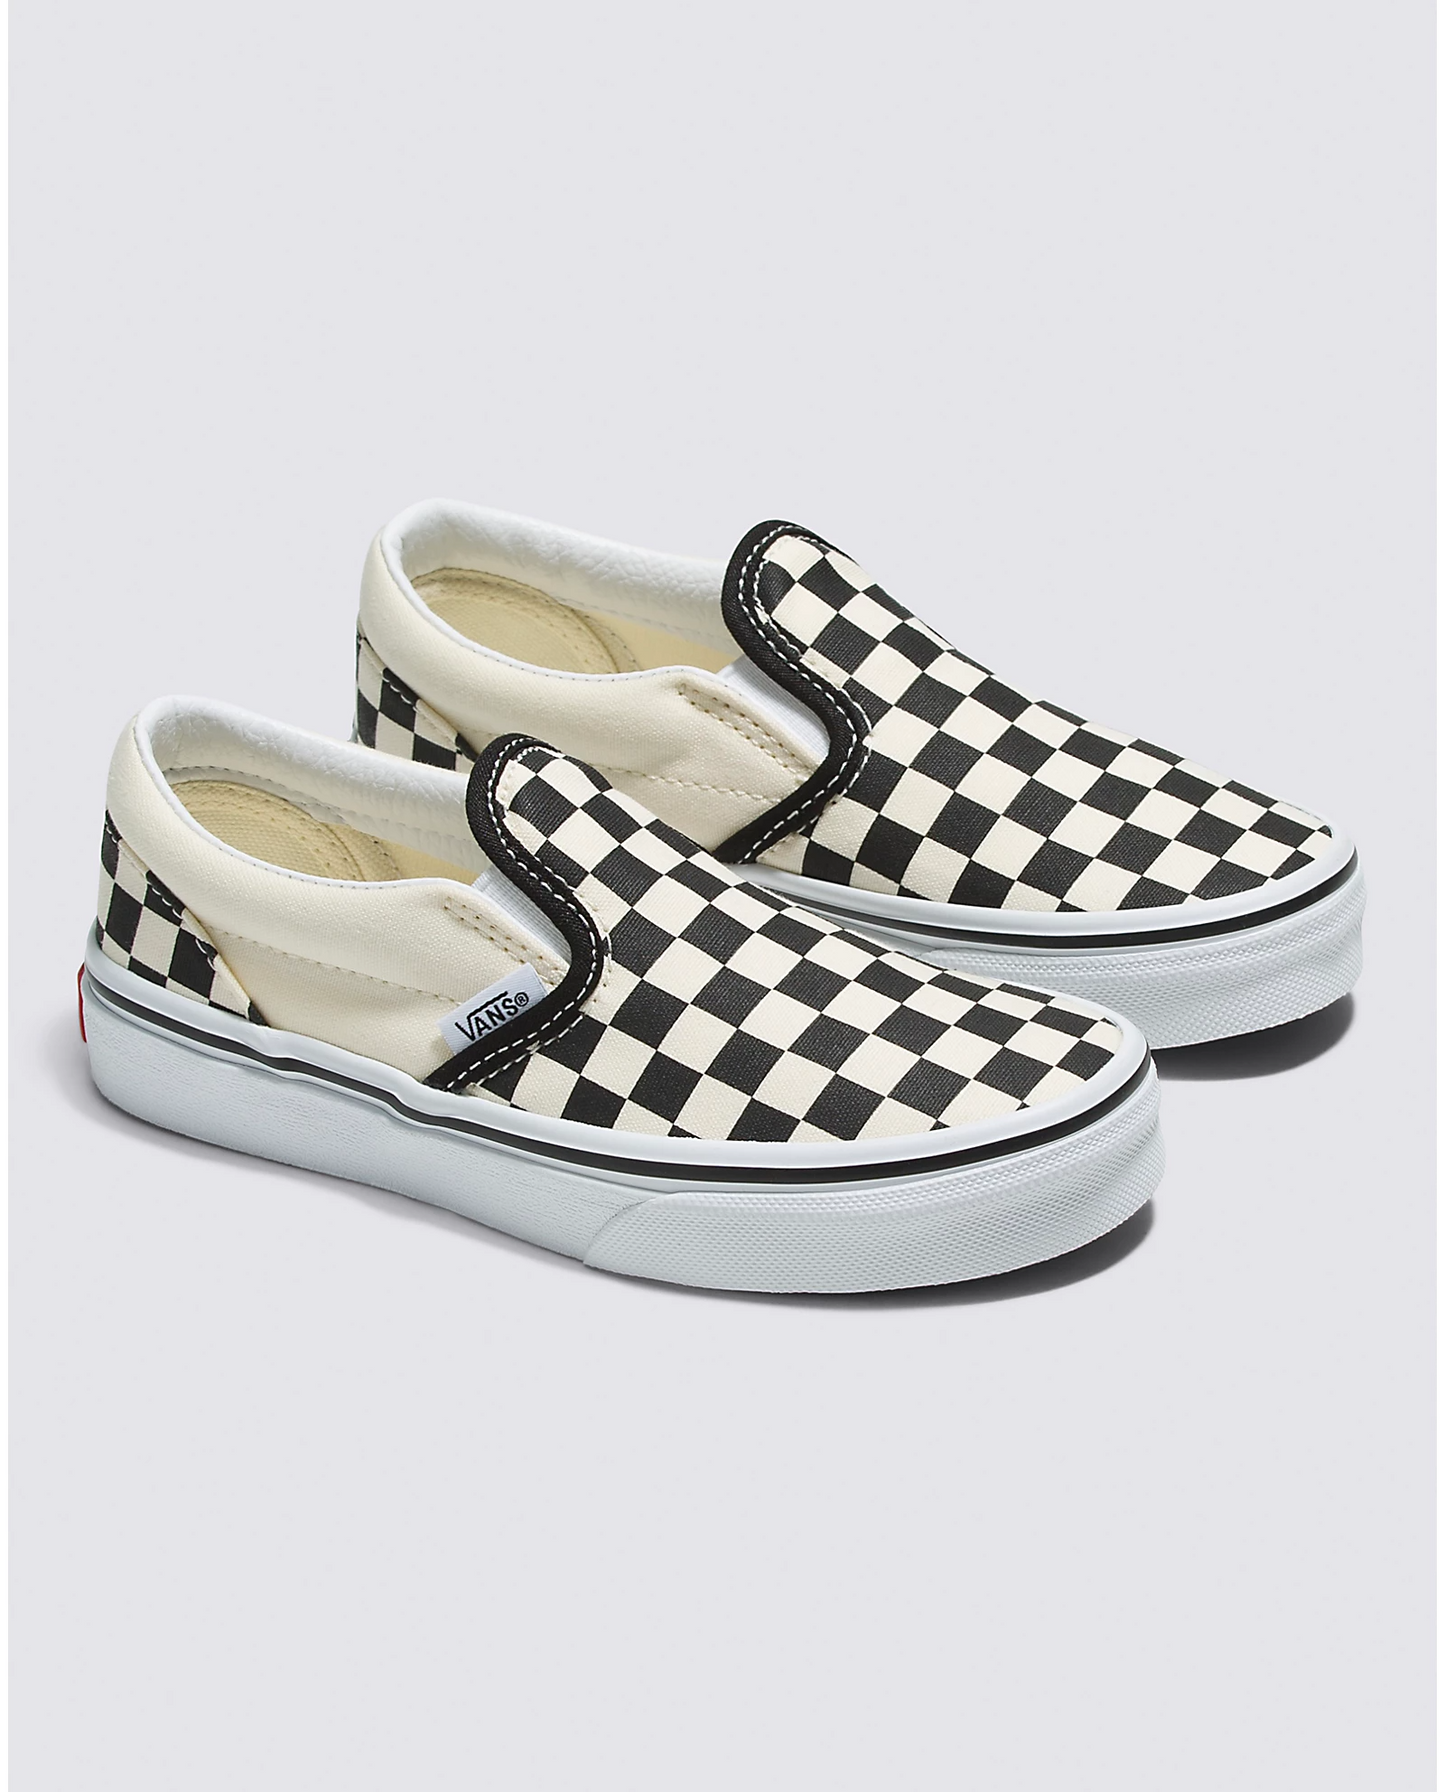 Vans Kids Classic Checkerboard Slip-On Shoes